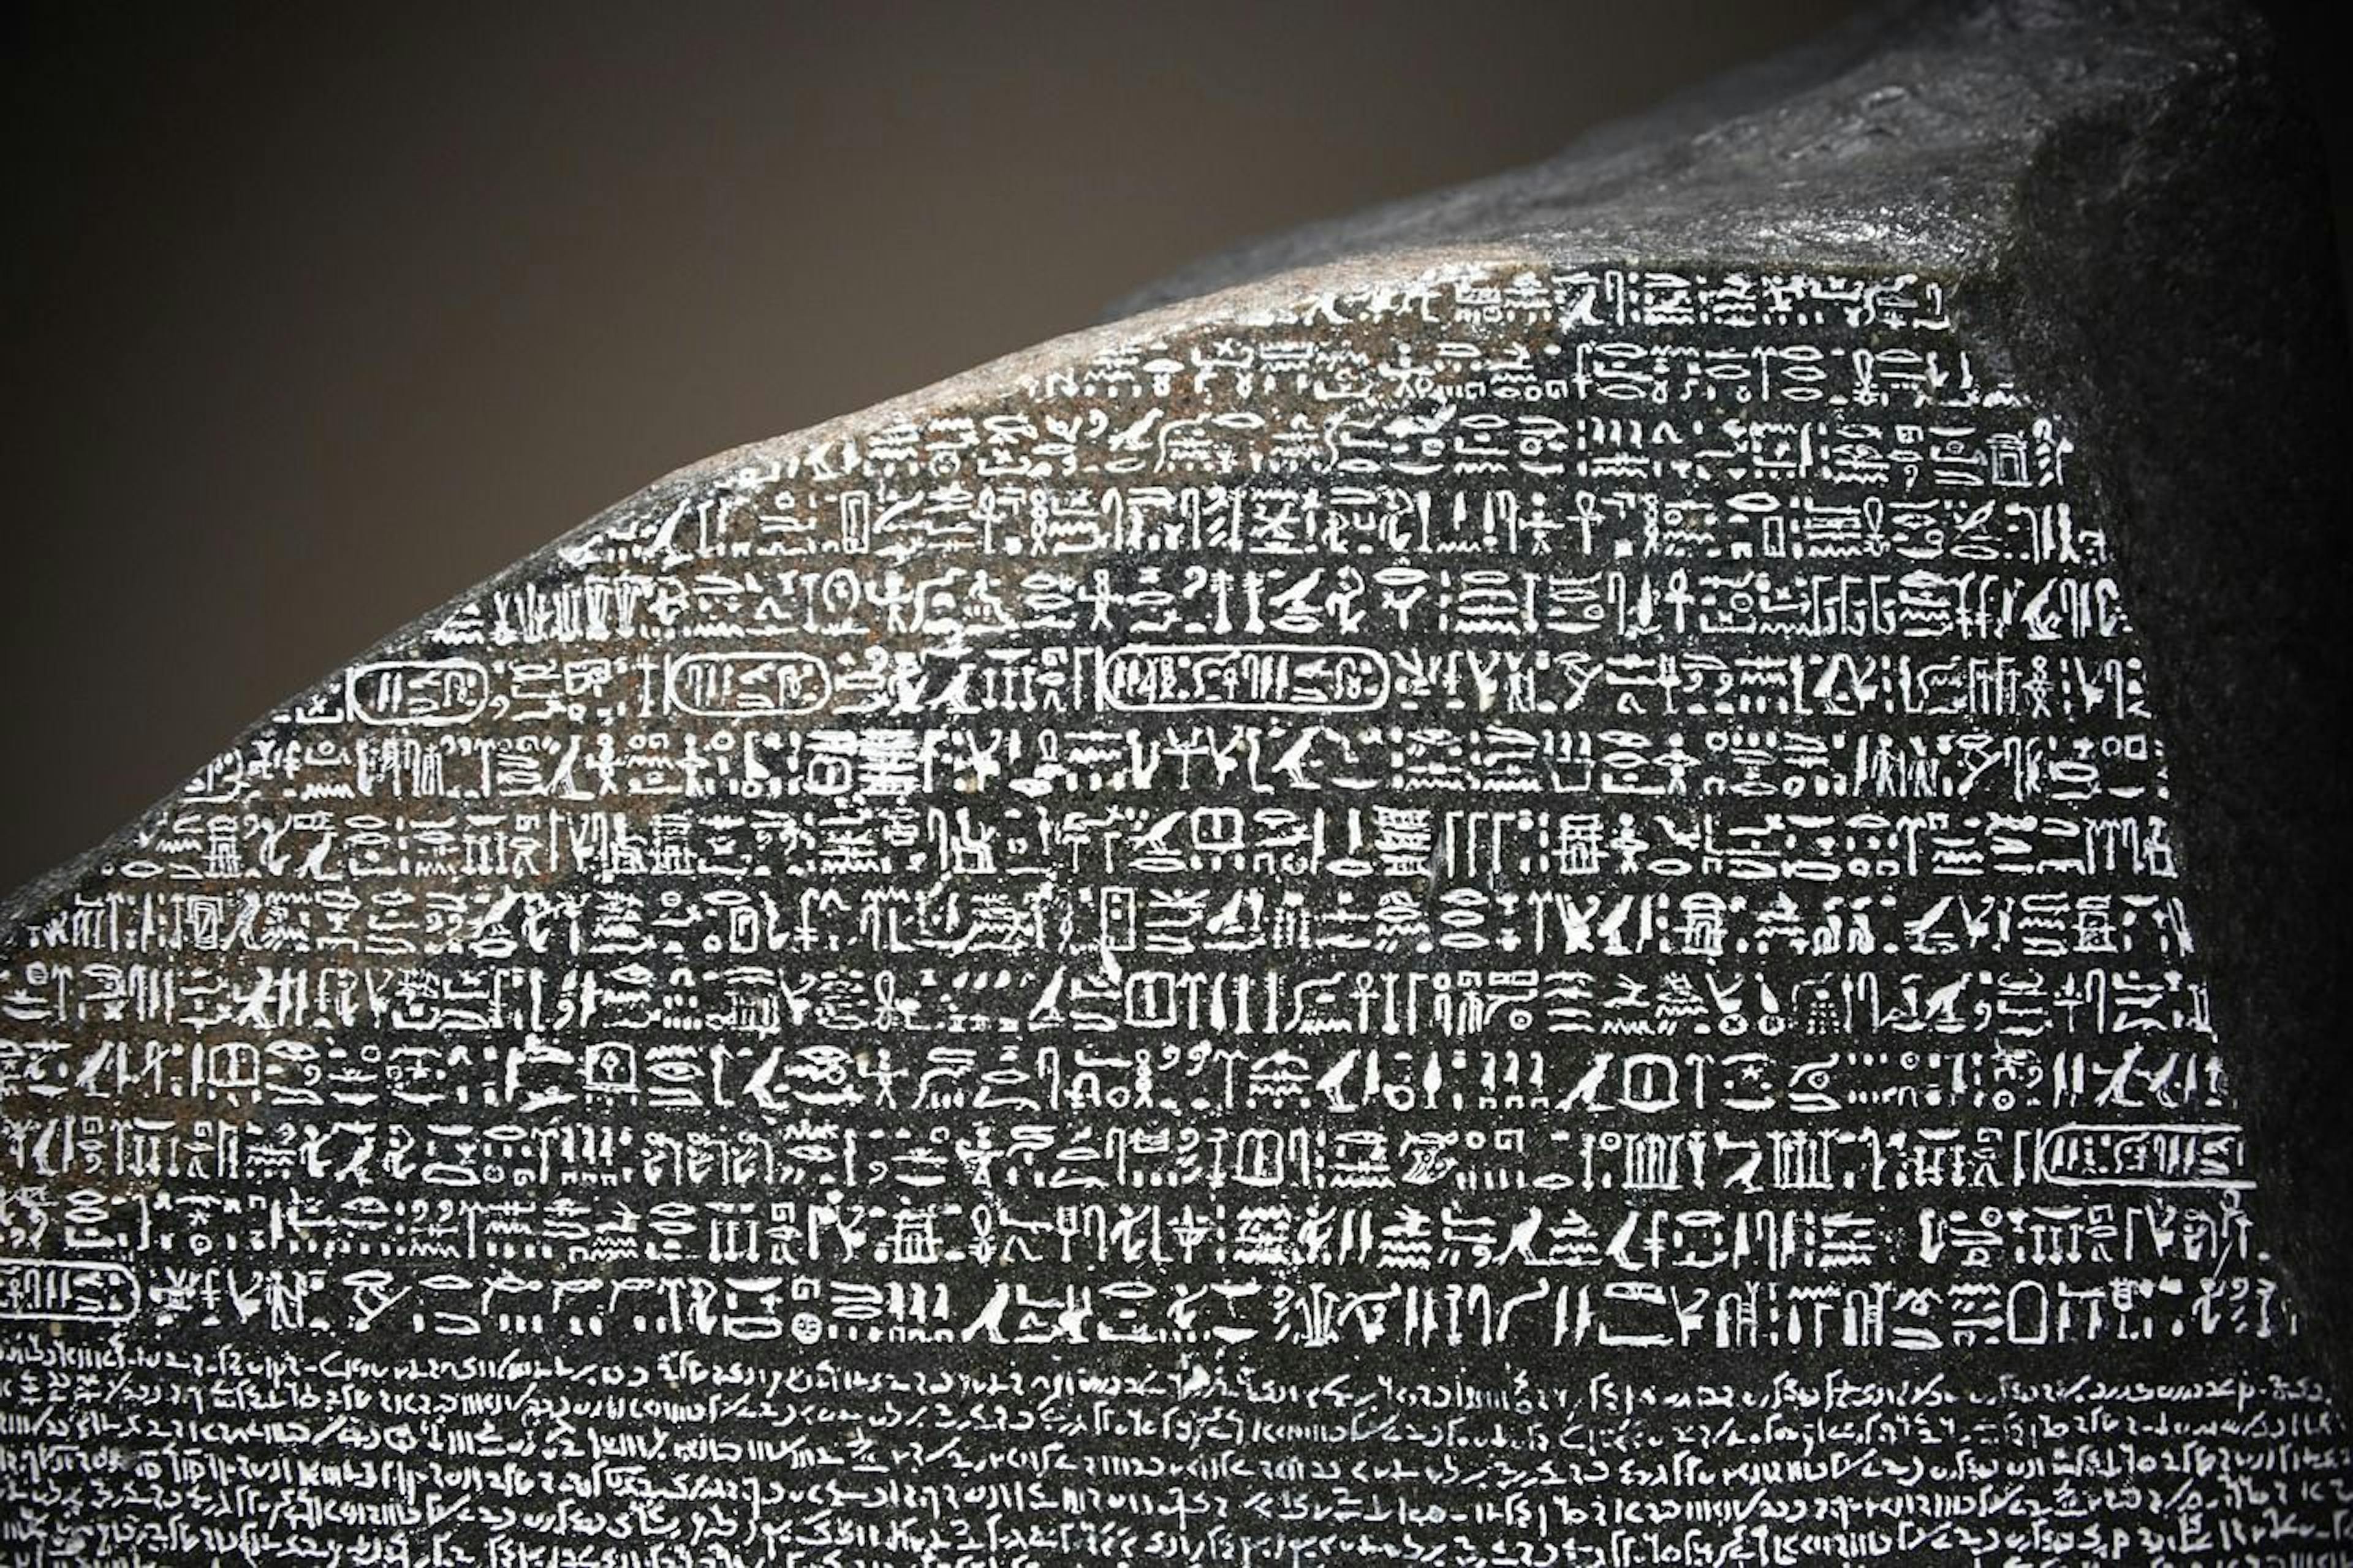 featured image - Towards a Rosetta Stone for (meta)data: Abstract & Introduction